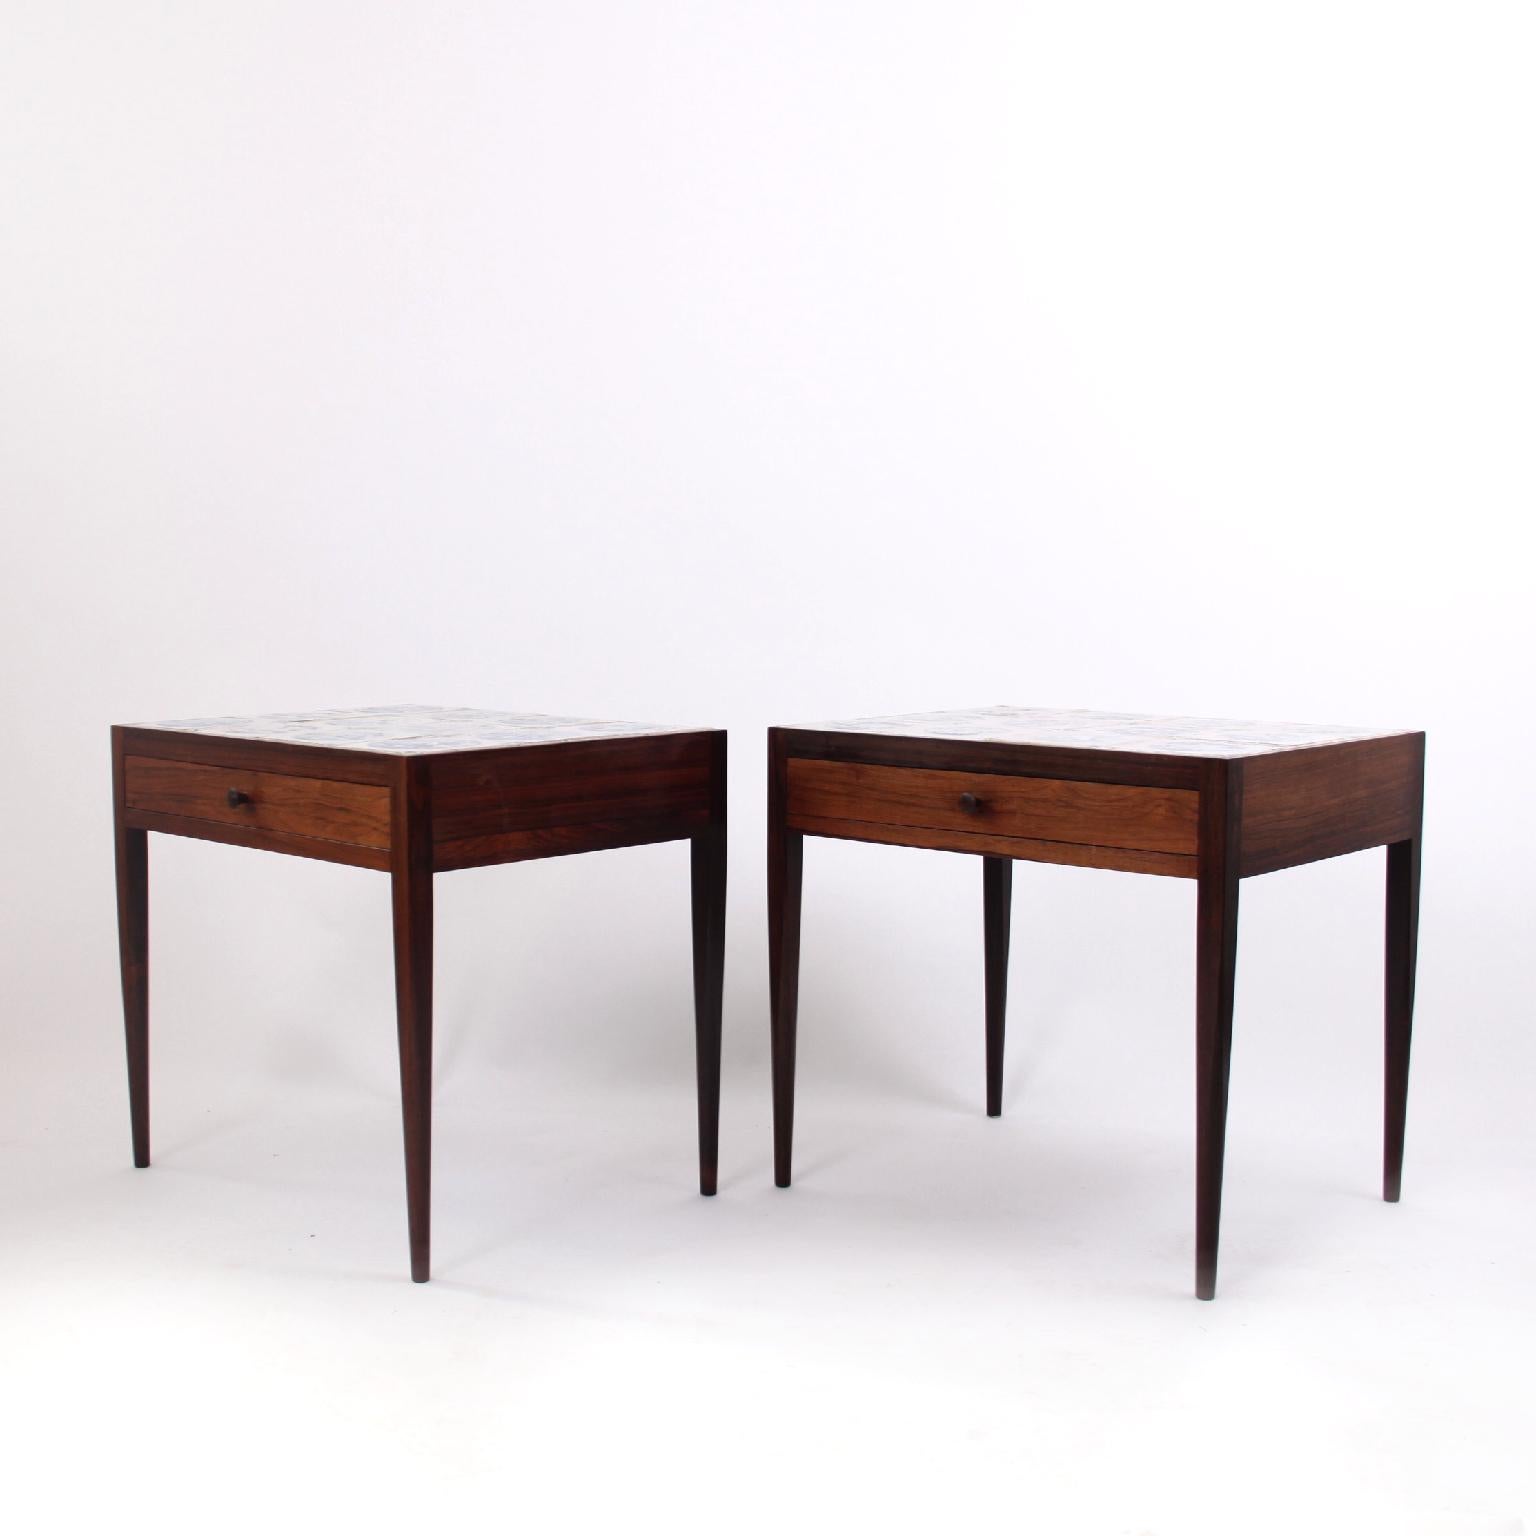 Oiled Niels Vodder Pair of Side Tables in Rosewood and Antique Delft Tiles